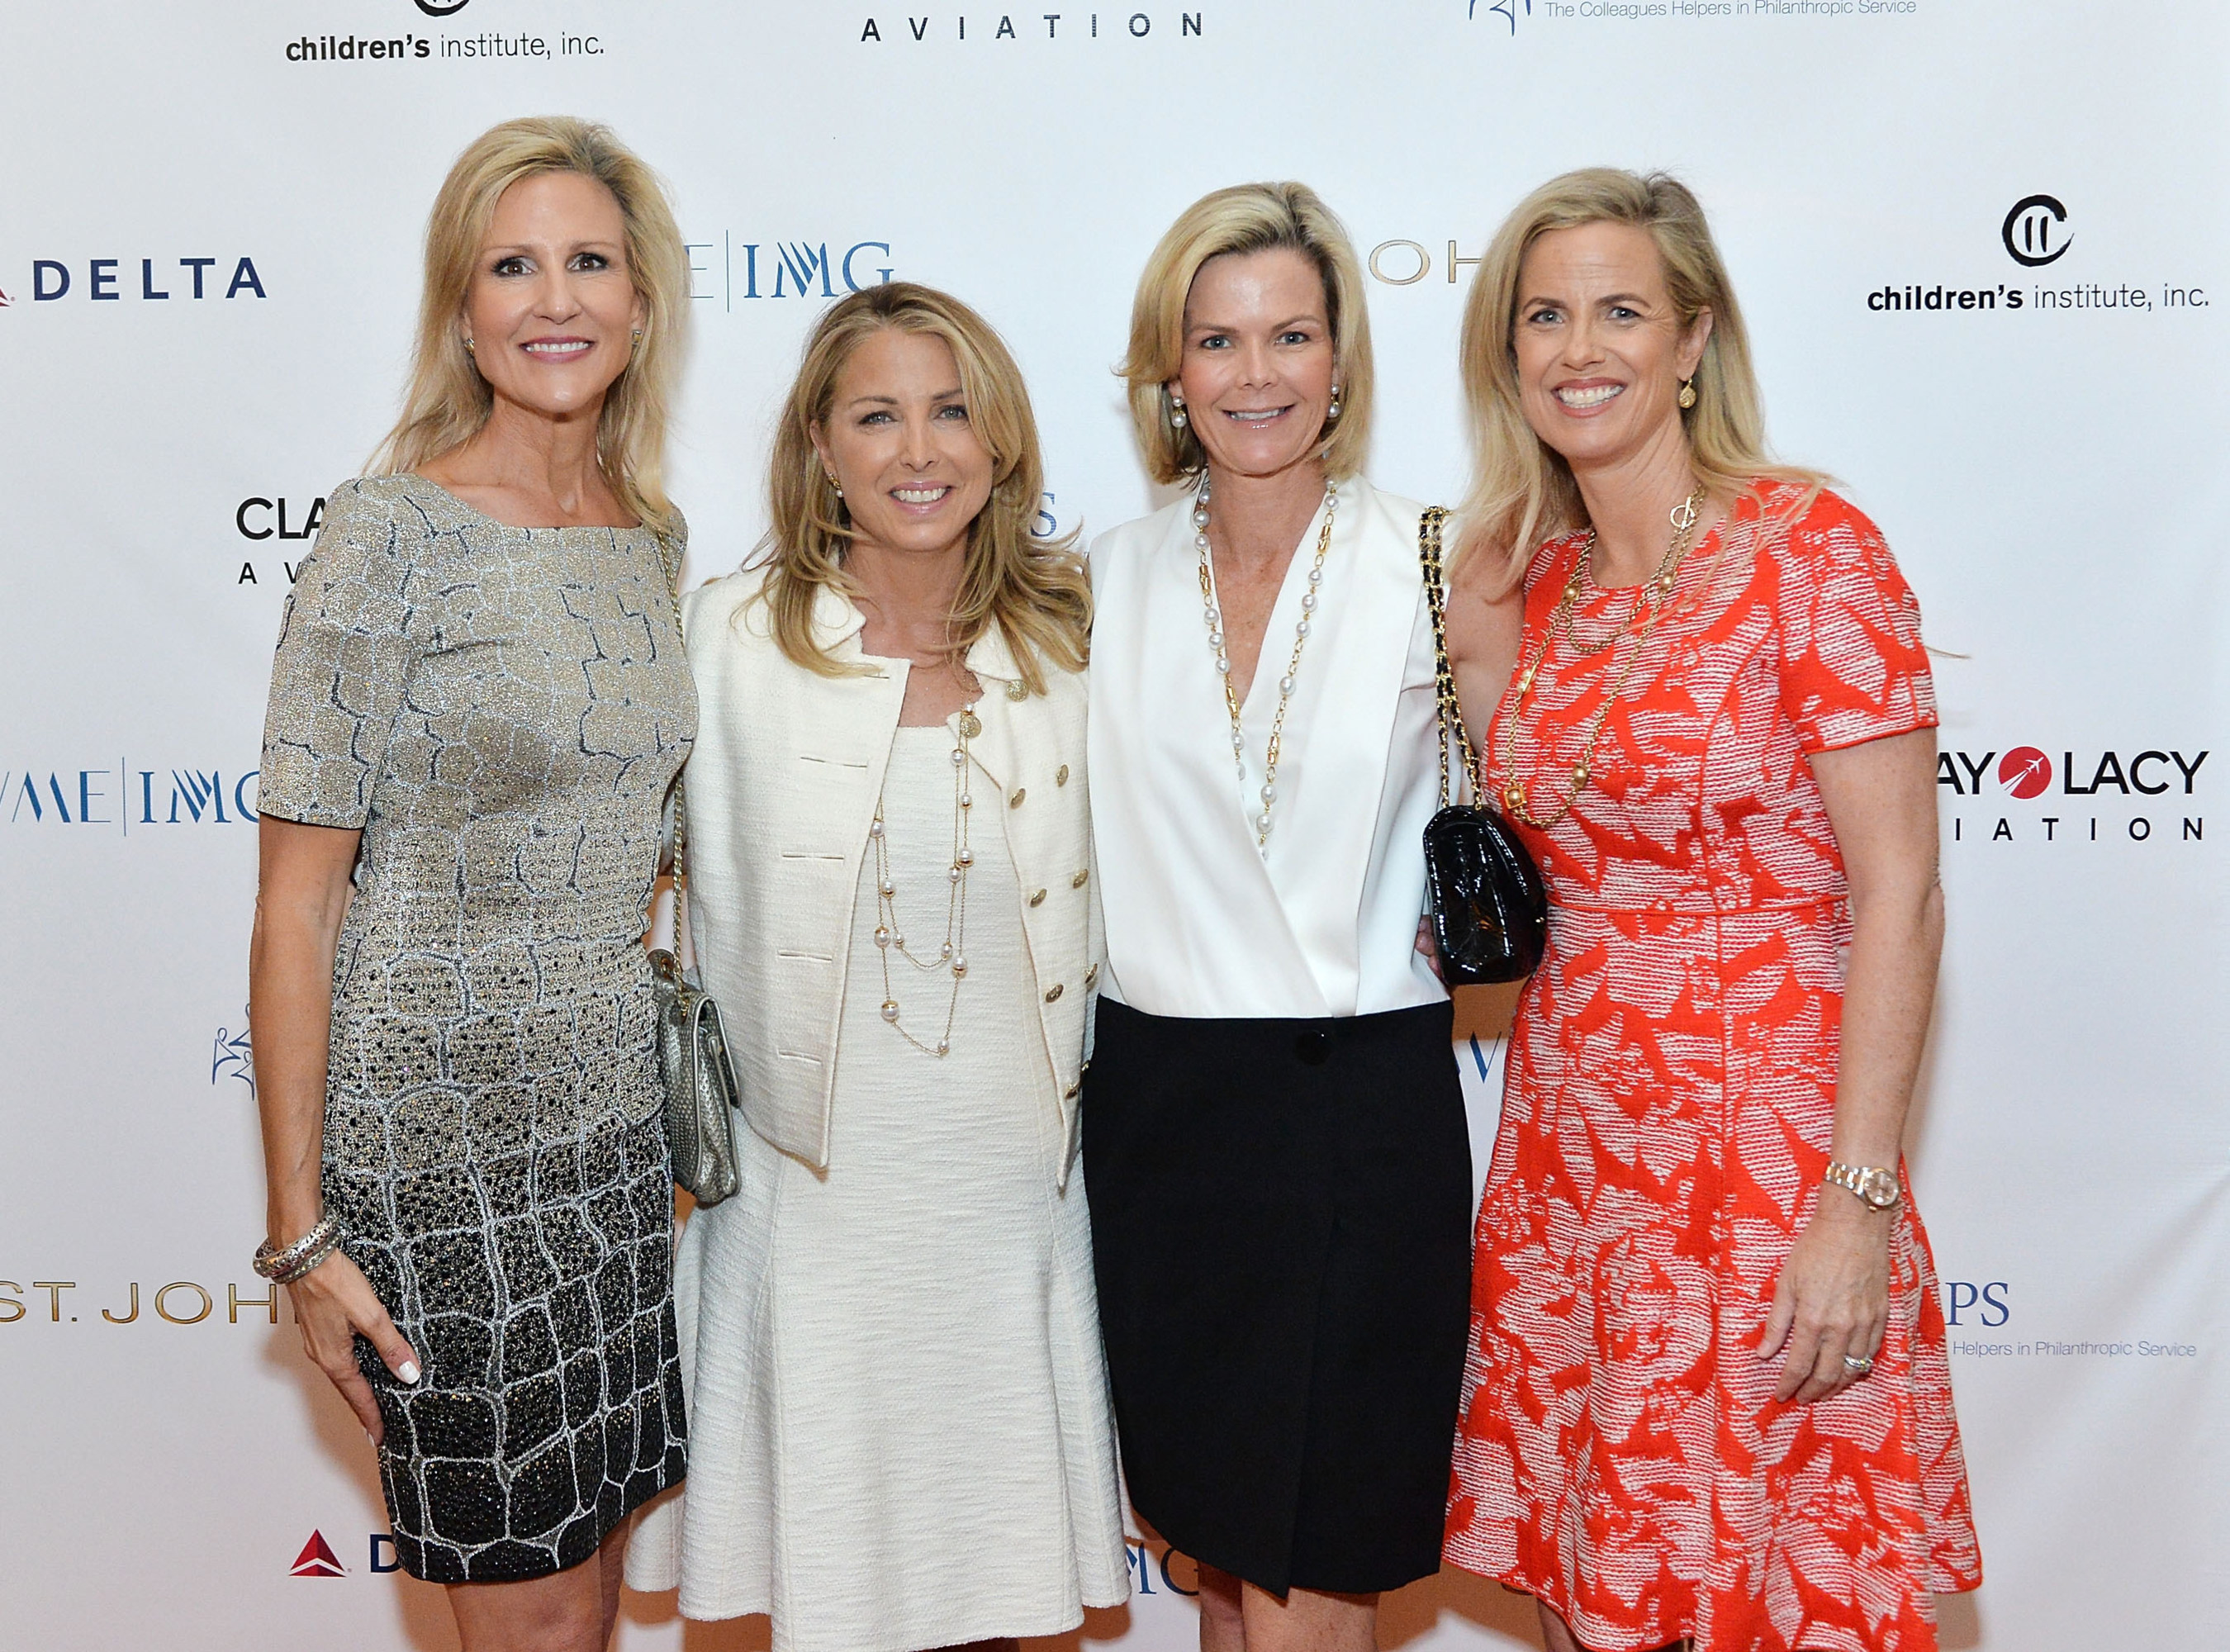 BEVERLY HILLS, CA - (L-R) Jill Olofson; Tricia Elattrache; Stephanie Booth Shafran and Colleen Pennell attend the CHIPS 2016 Spring Luncheon and Fashion Show, Benefitting Children's Institute, Inc. (CII) The event--held at The Beverly Hills Hotel--honored Stanley and Fiona Druckenmiller and featured the St. John Pre-Fall 2016 Collection.